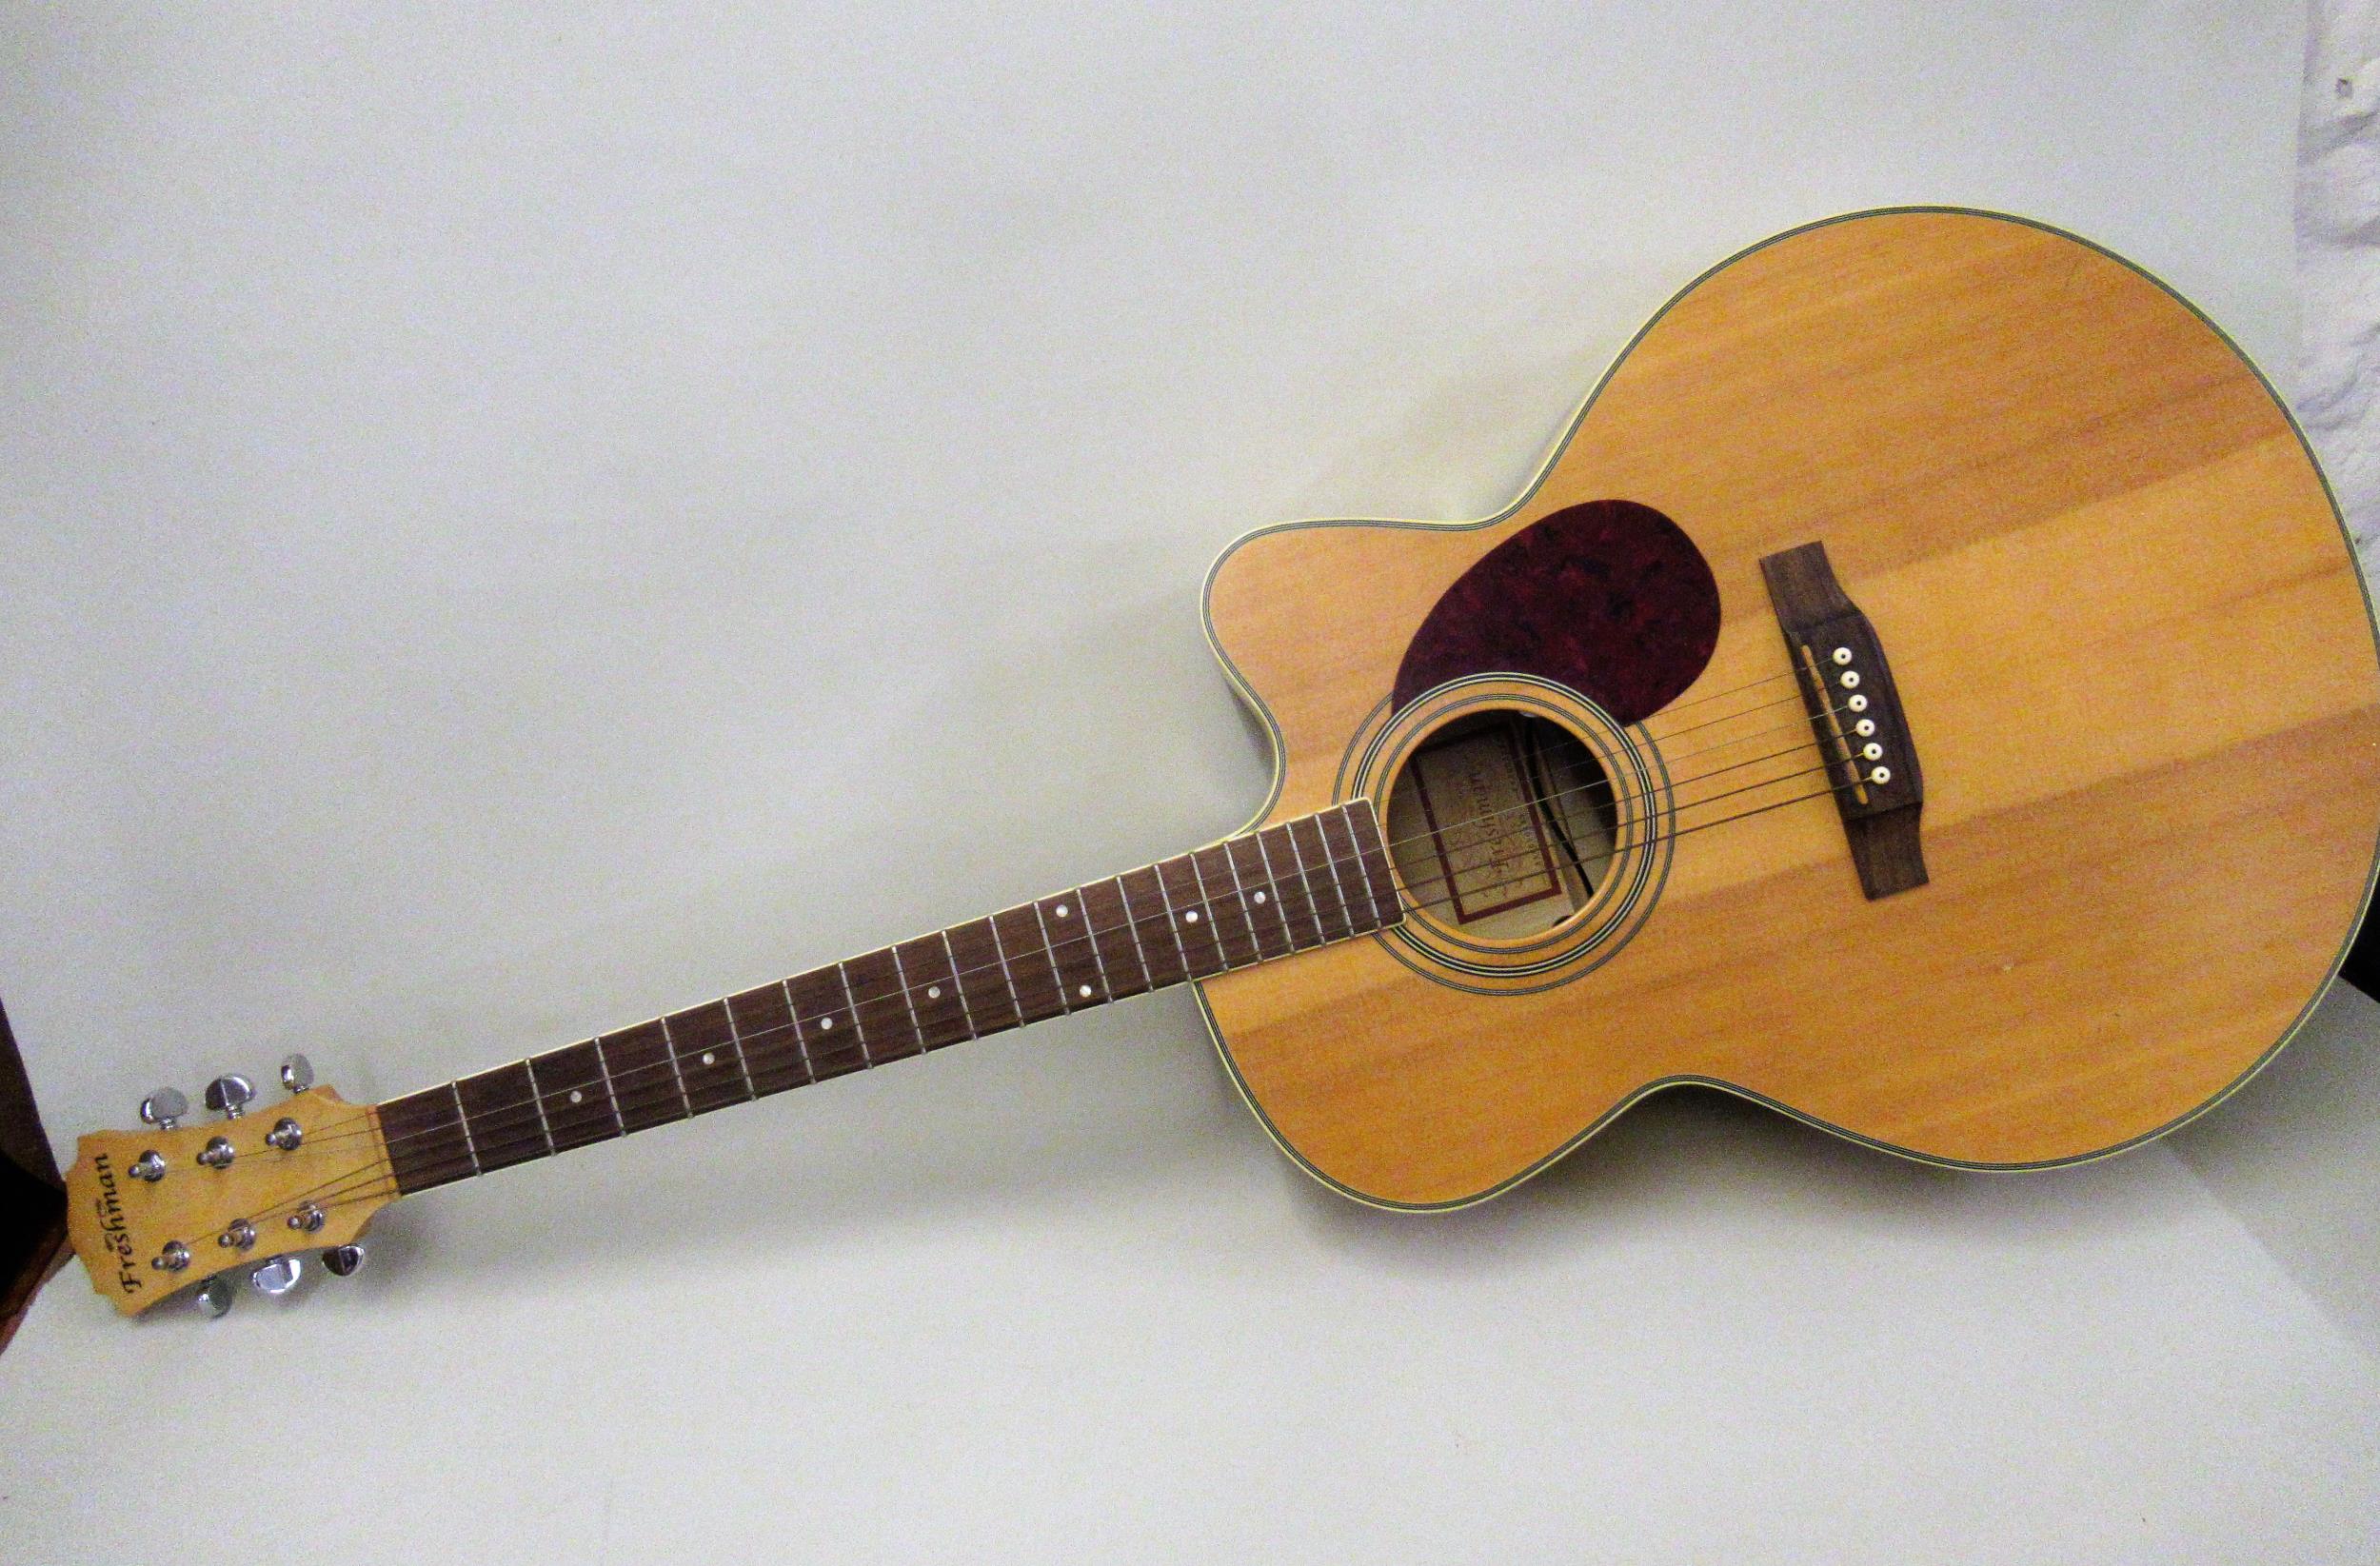 Freshman FA300 Jem/S acoustic guitar, (with damages)